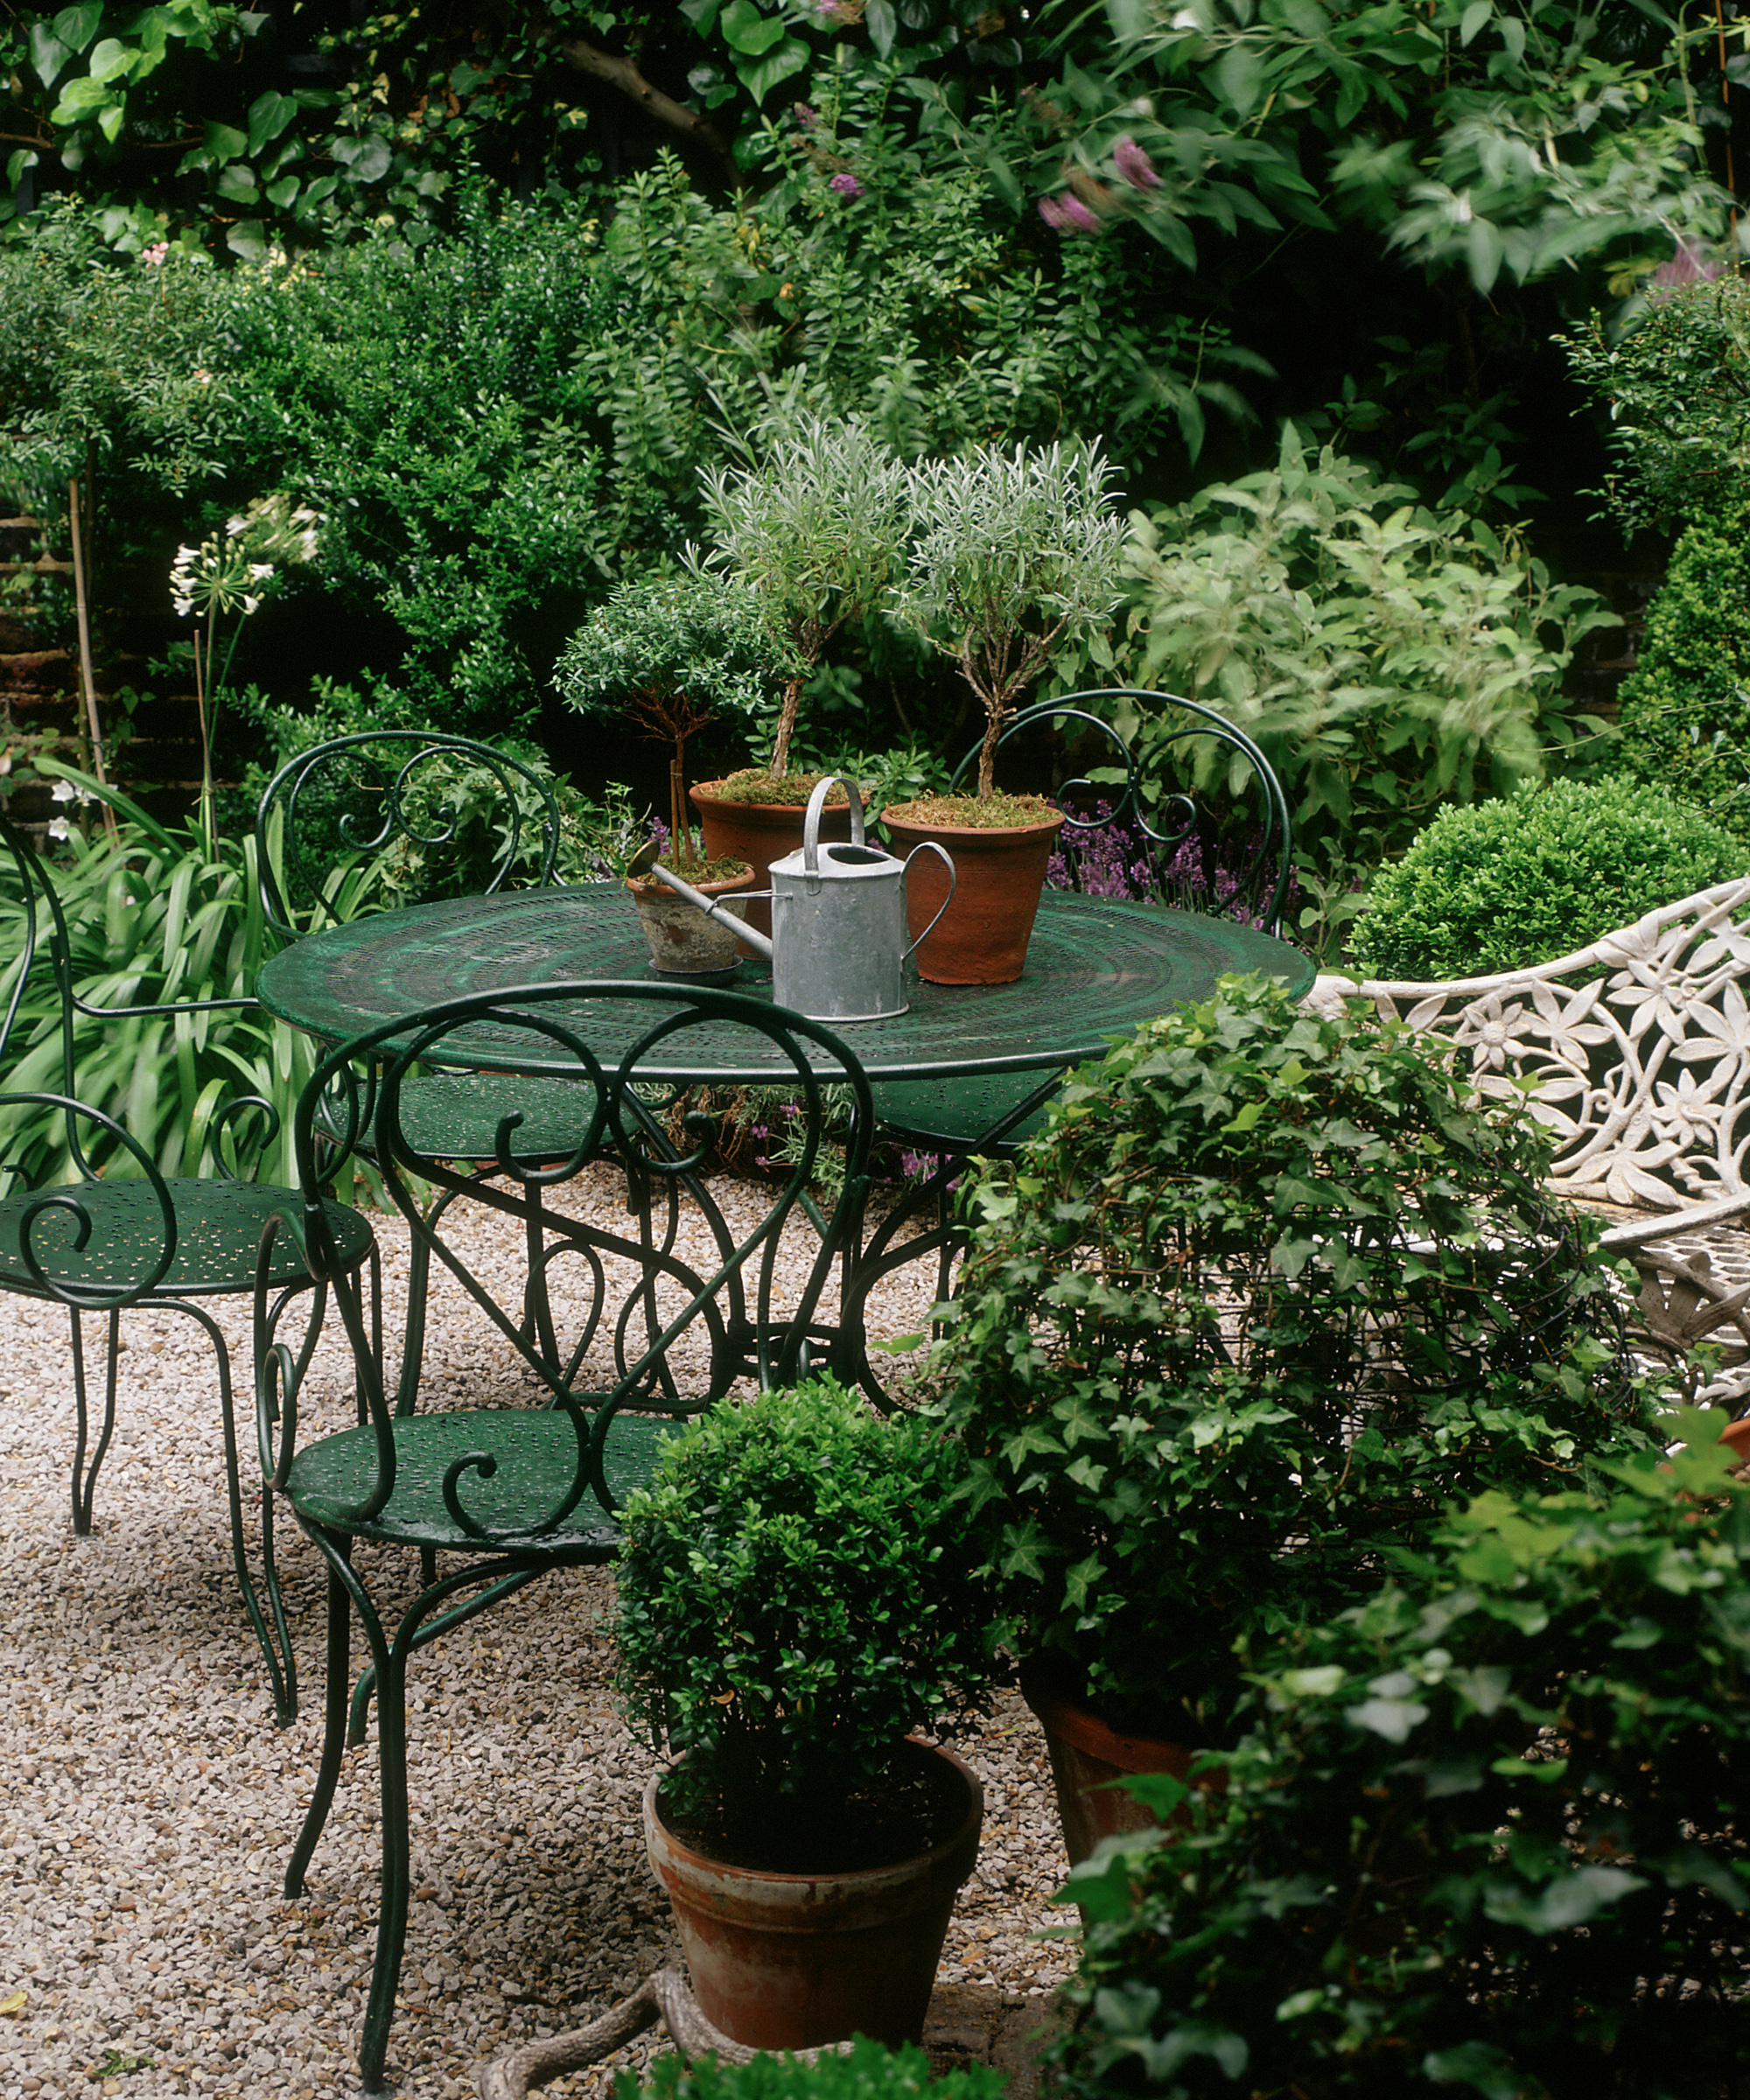 Patio planter ideas on a gravel patio with green metal round table and chairs.